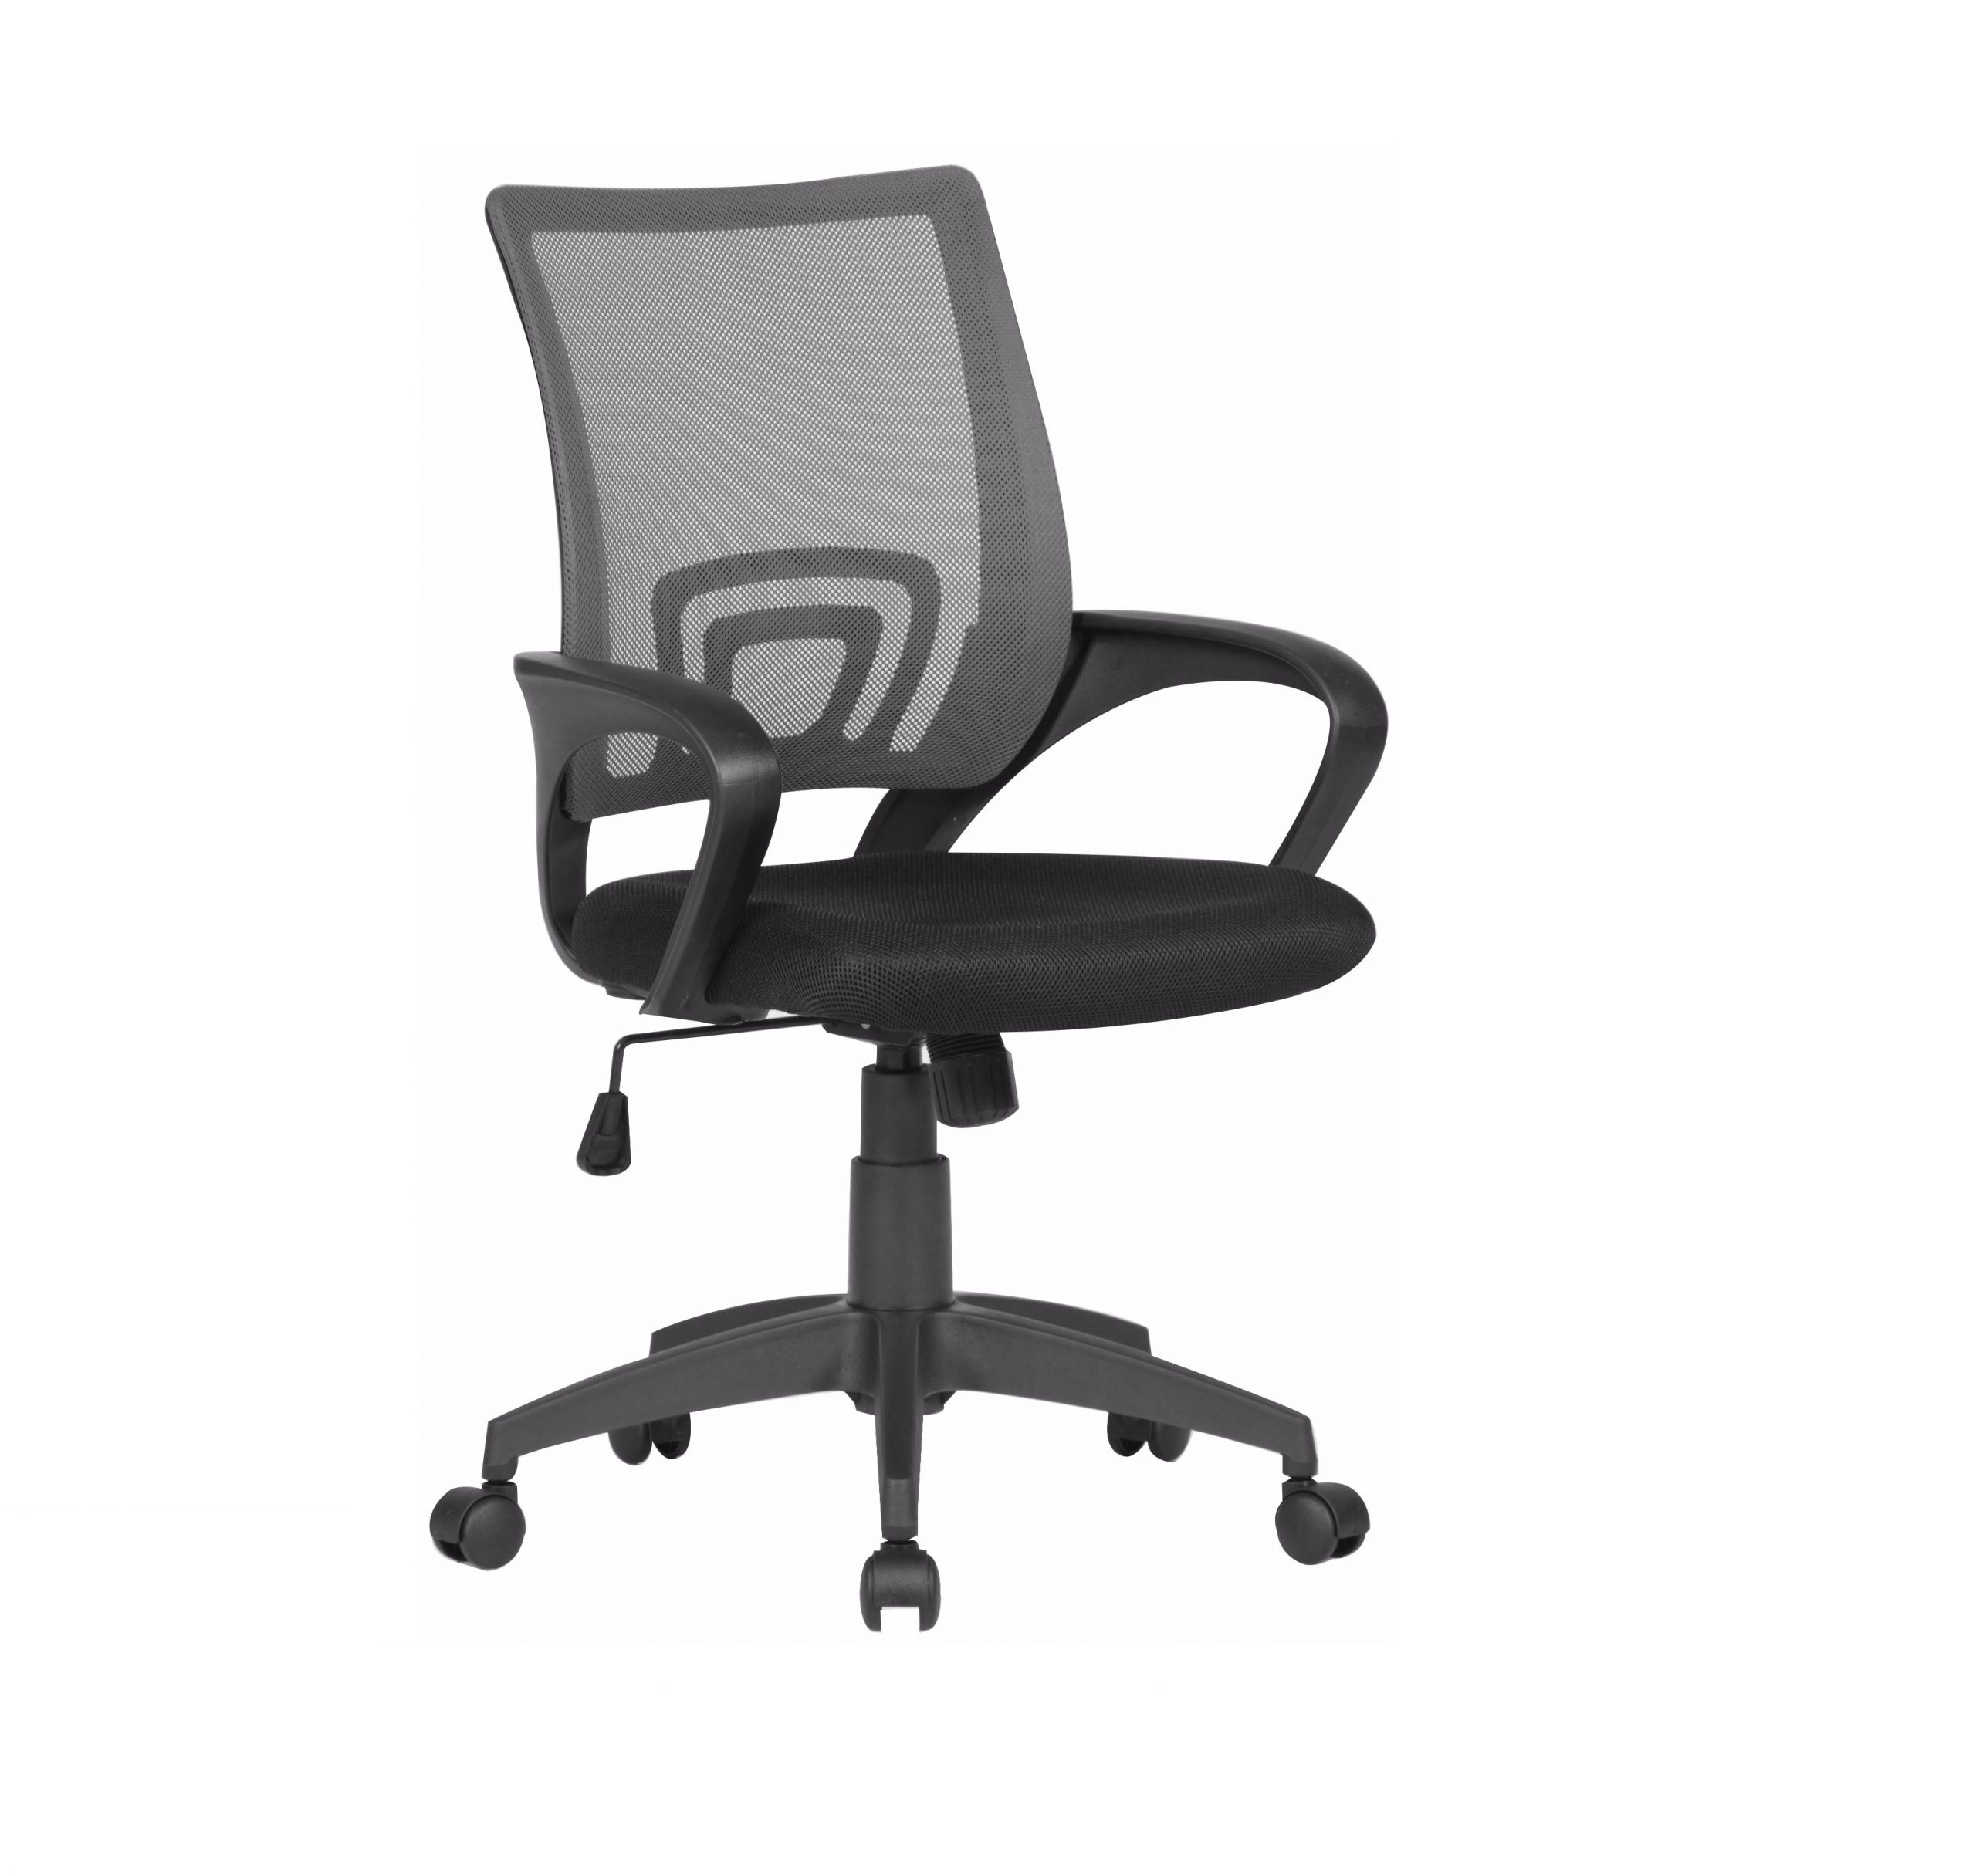 Amino Executive Mesh chair  With  Gaslitf , Padded Seat, Plastic  Arms & Base